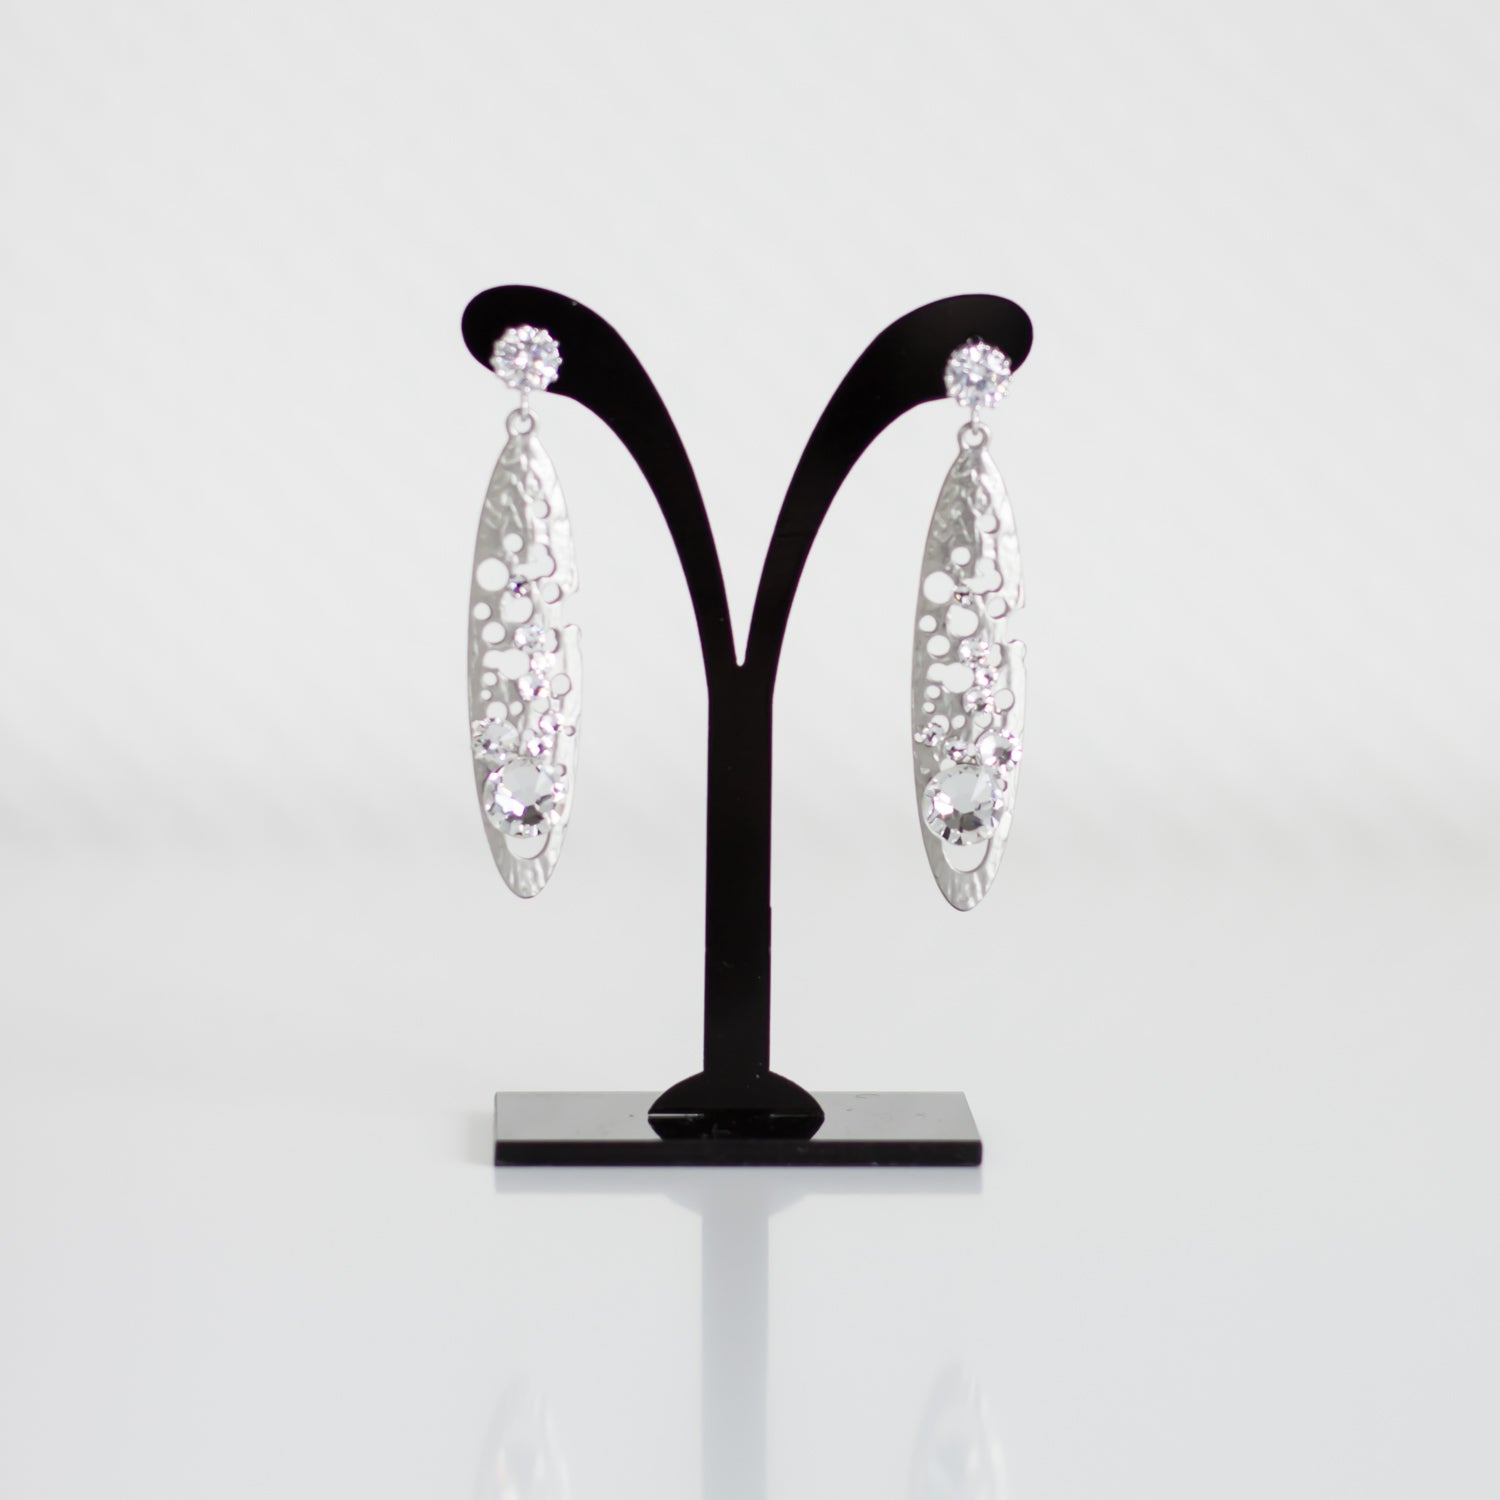 Shop handmade silver-plated dangle & drop earrings with cubic zirconia stud and oblong filigree crystal accents.